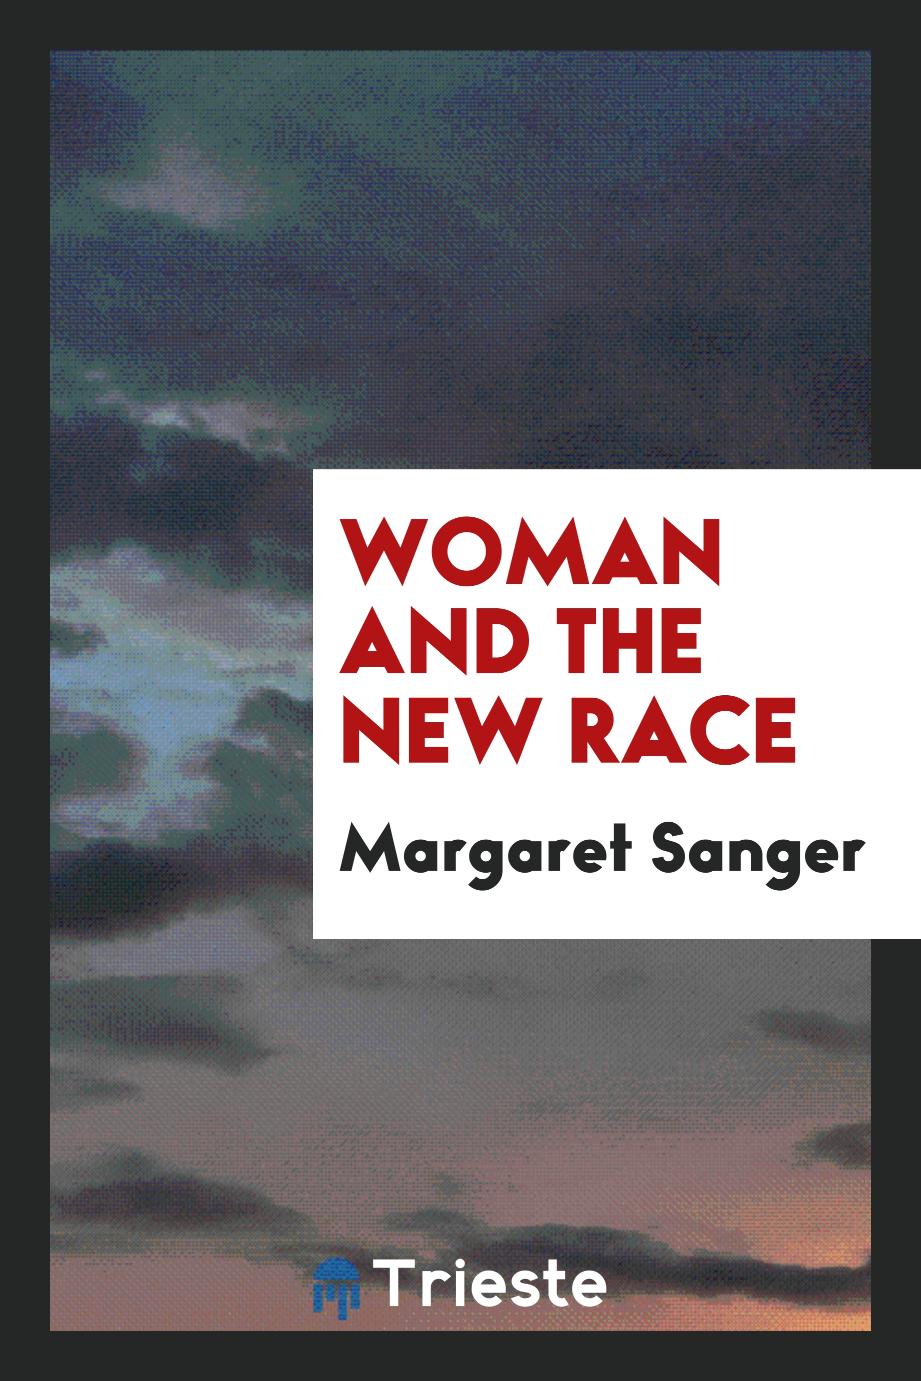 Woman and the new race